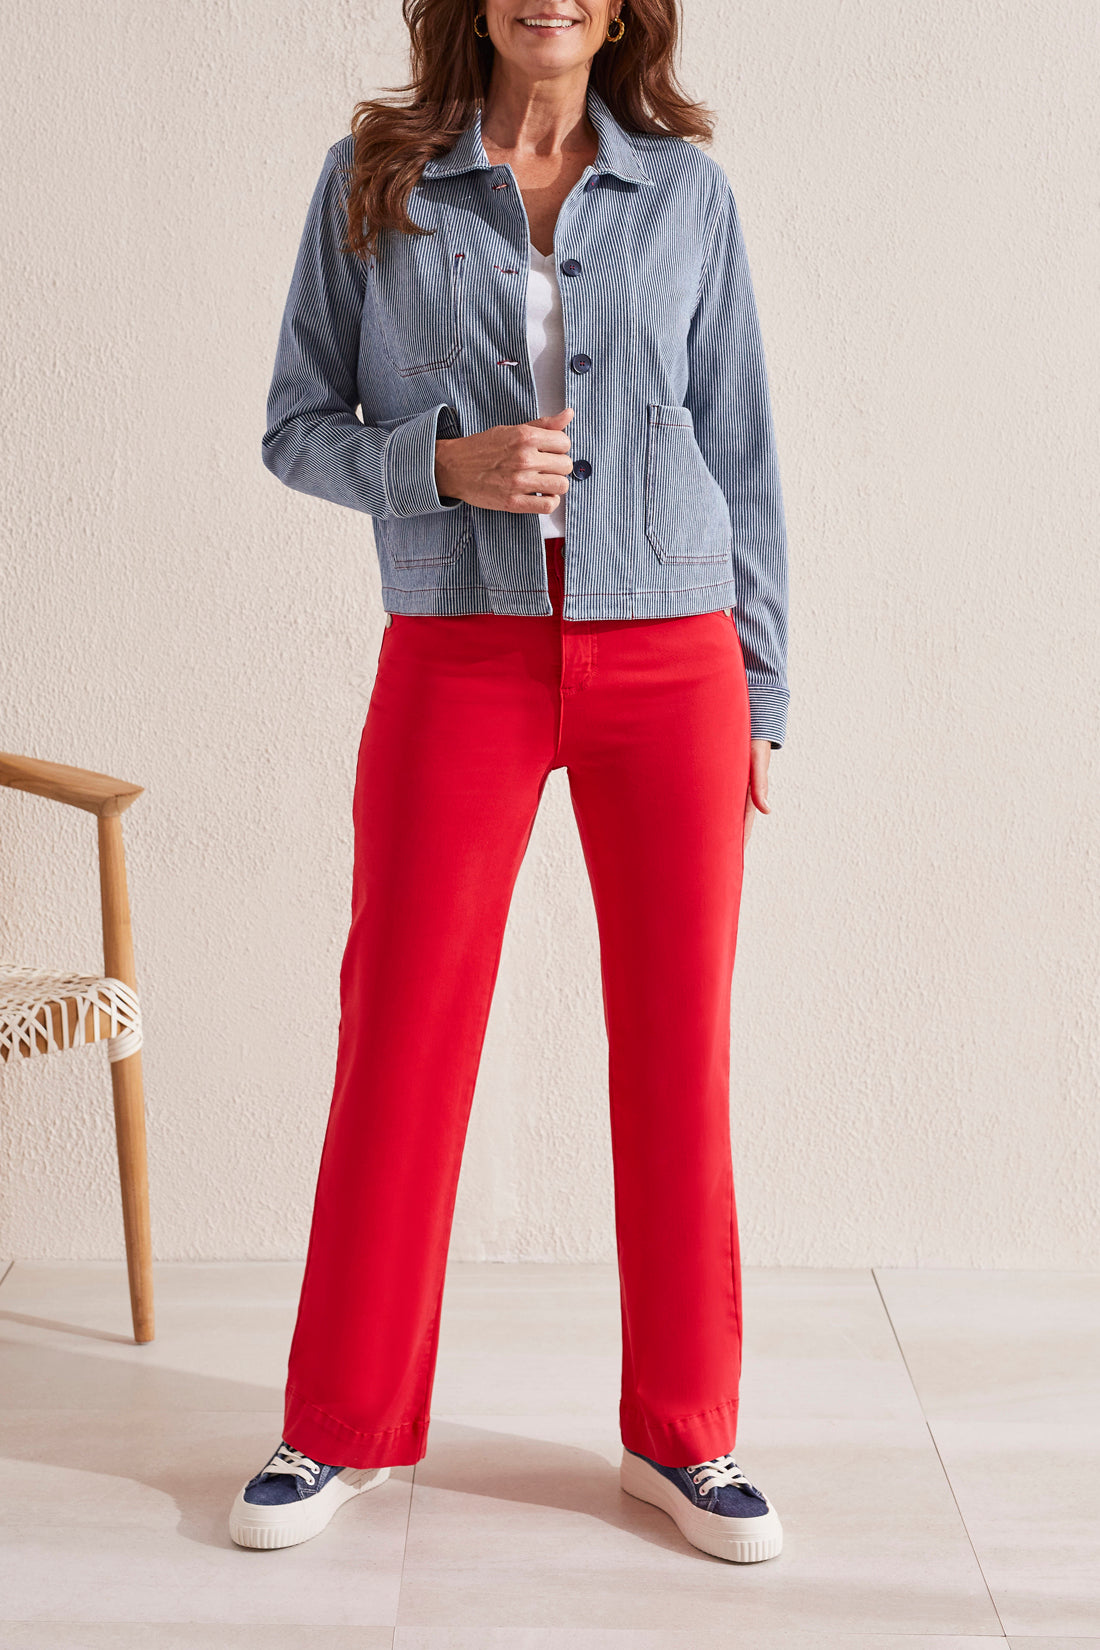 Poppy Red Micro Flare Jeans by Tribal